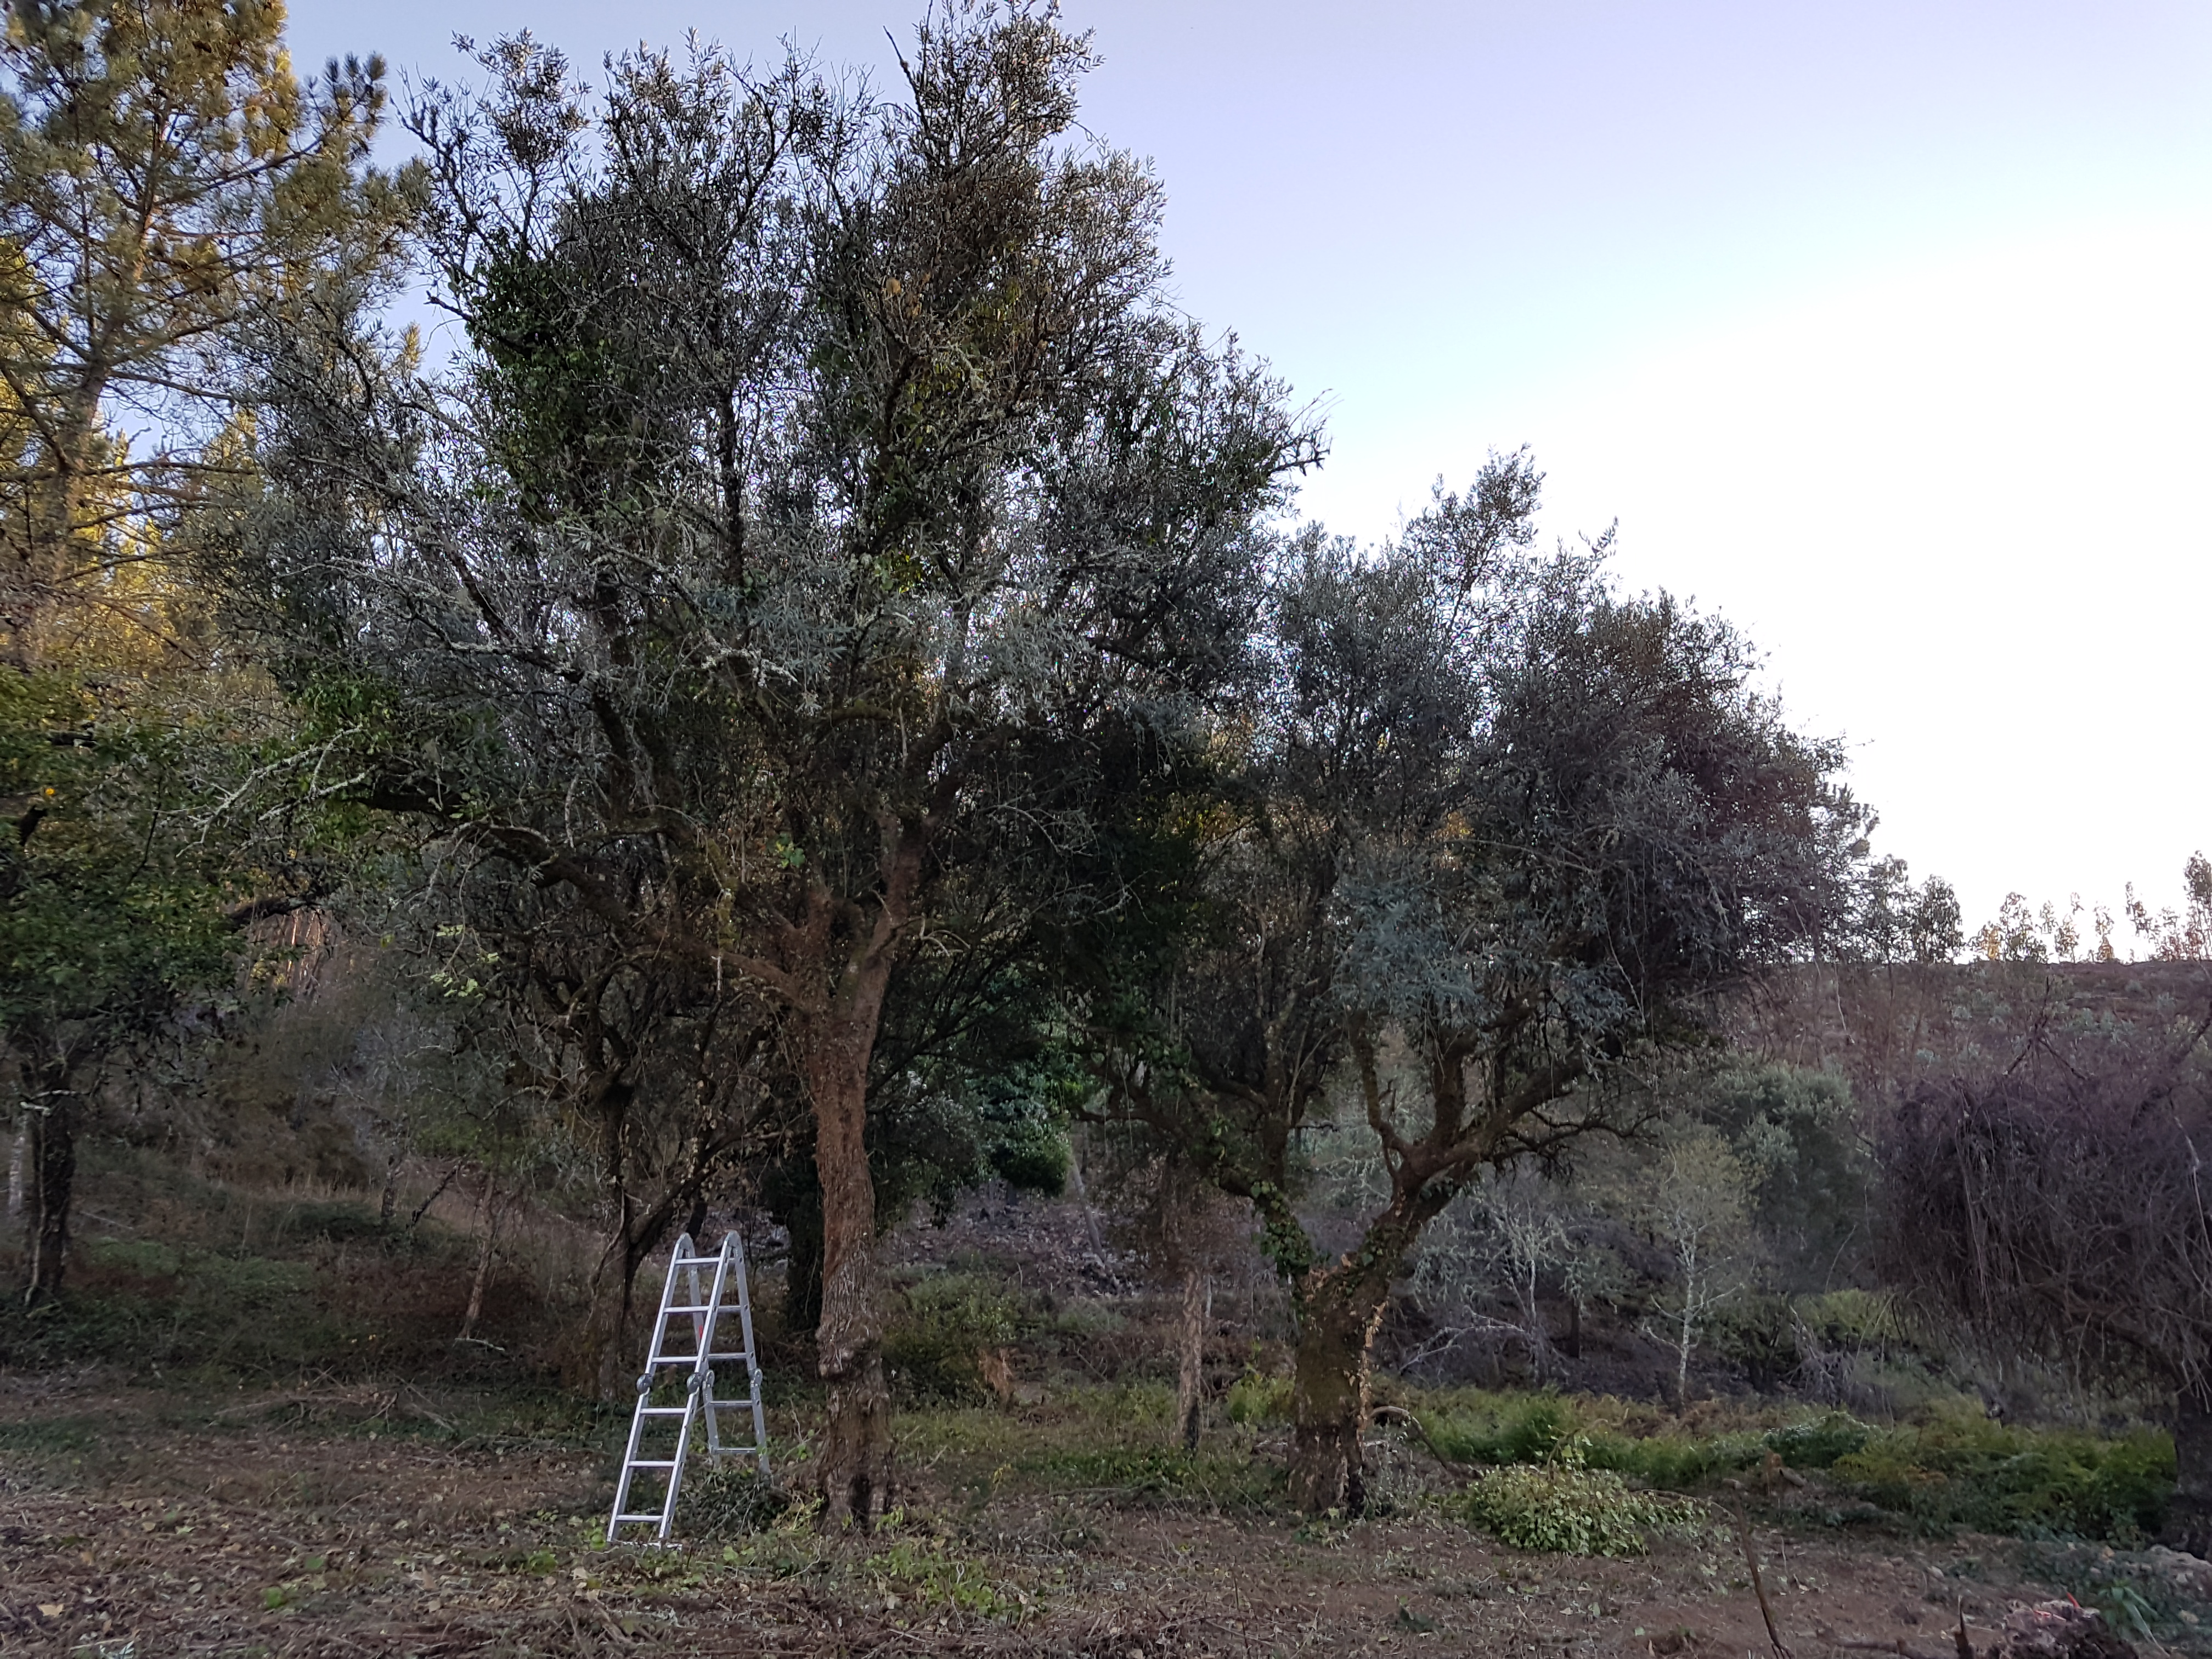 The liberated olive trees.